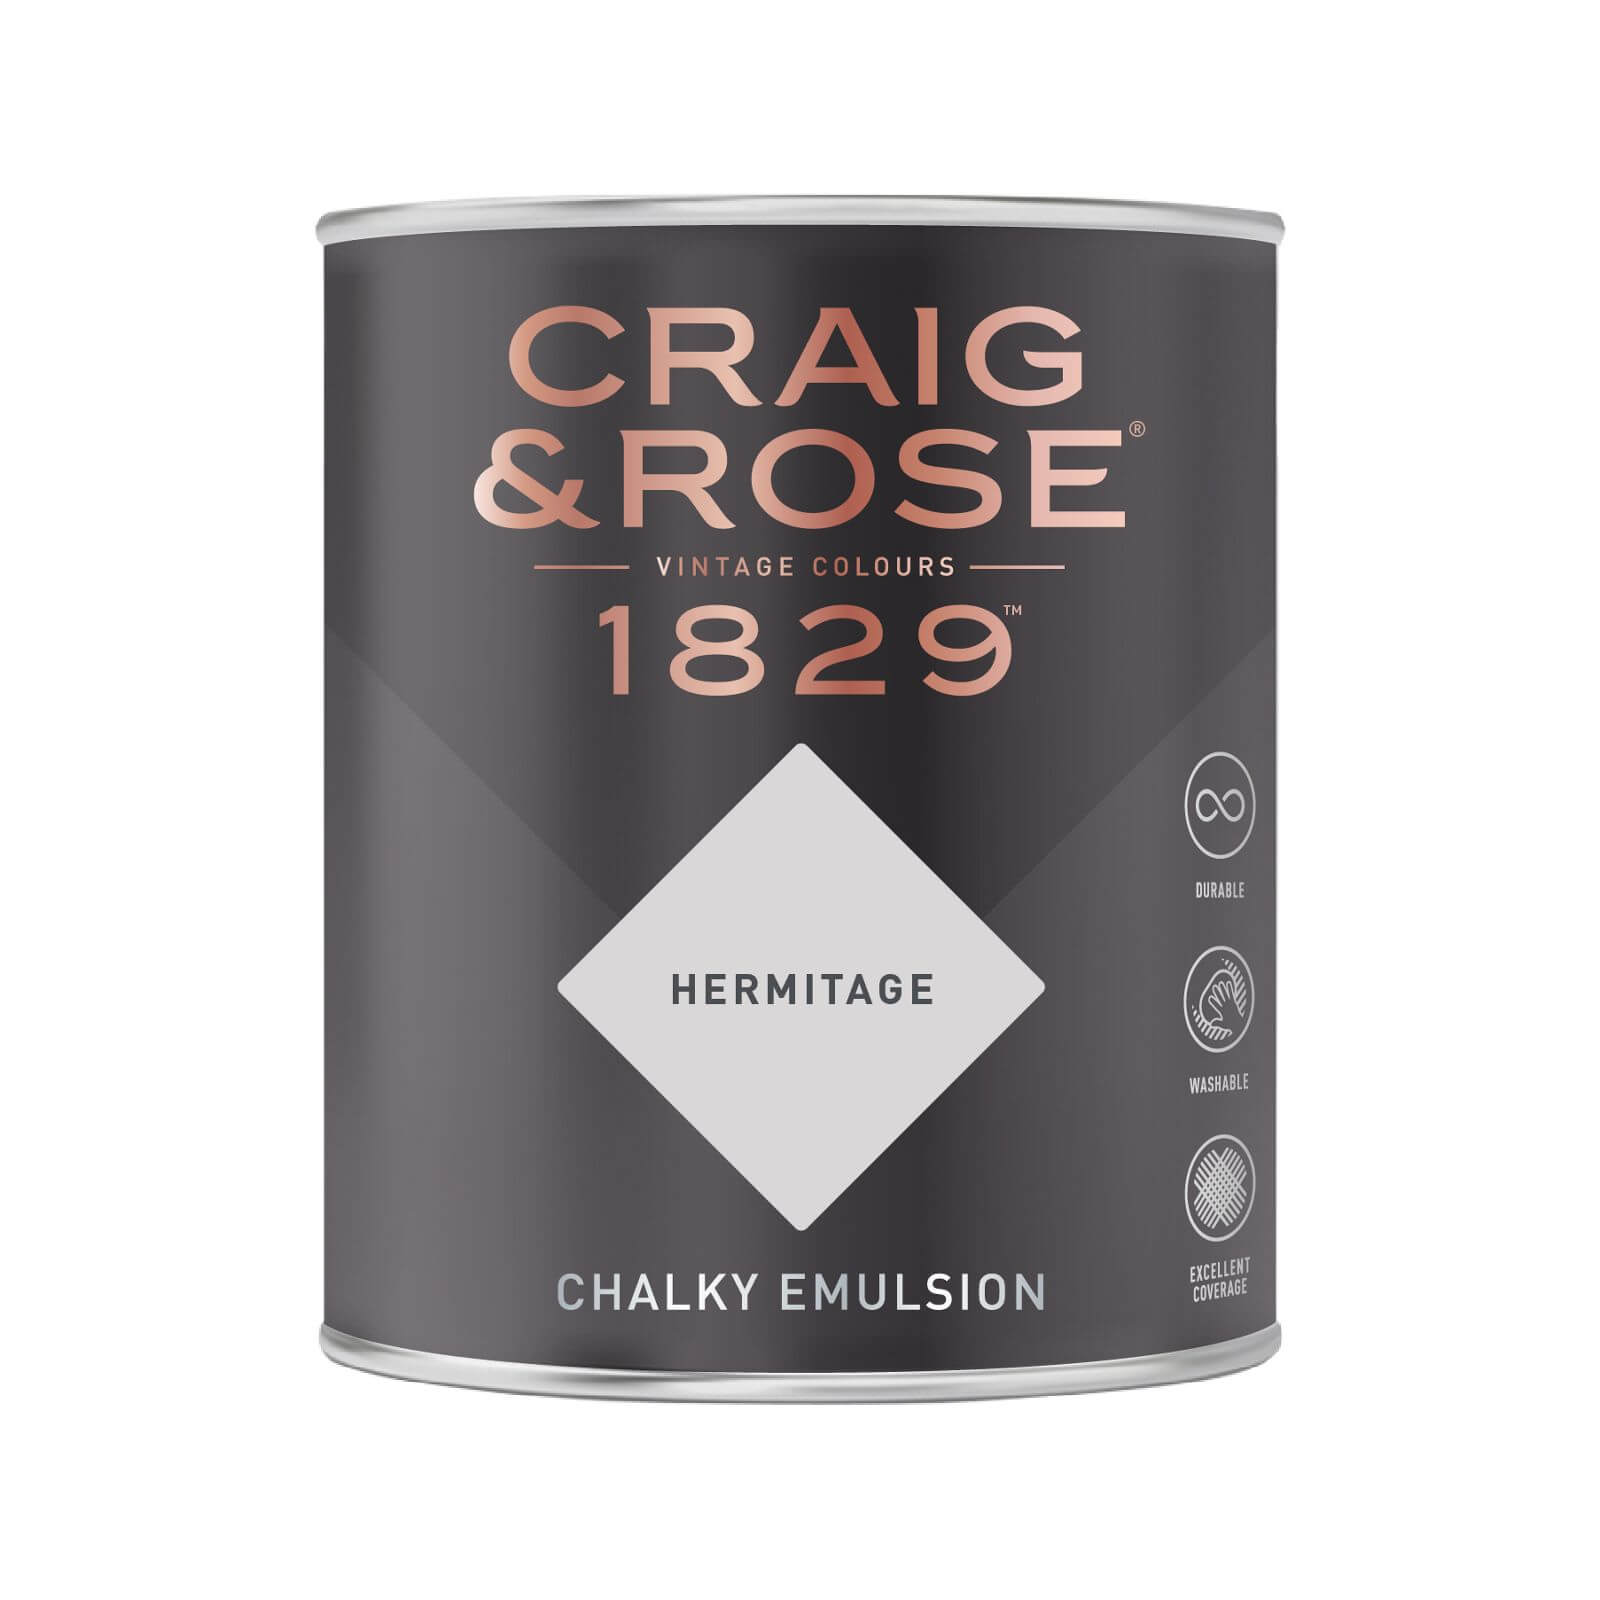 Craig & Rose 1829 Chalky Emulsion Paint Hermitage - 750ml